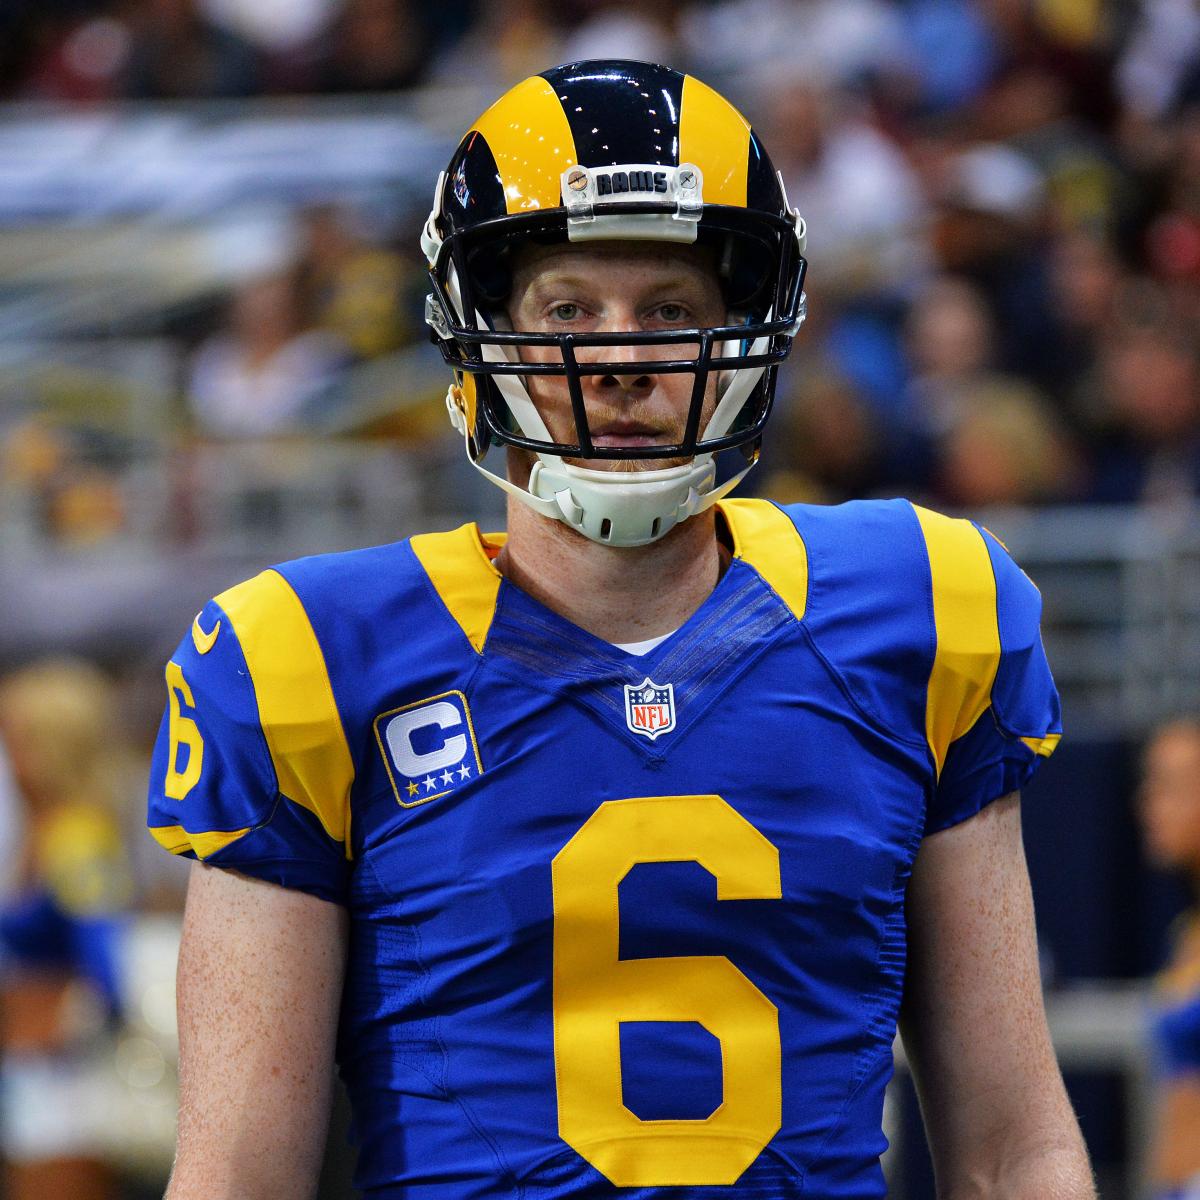 I know Johnny Hekker hinted that all yellow uniforms were doubtful